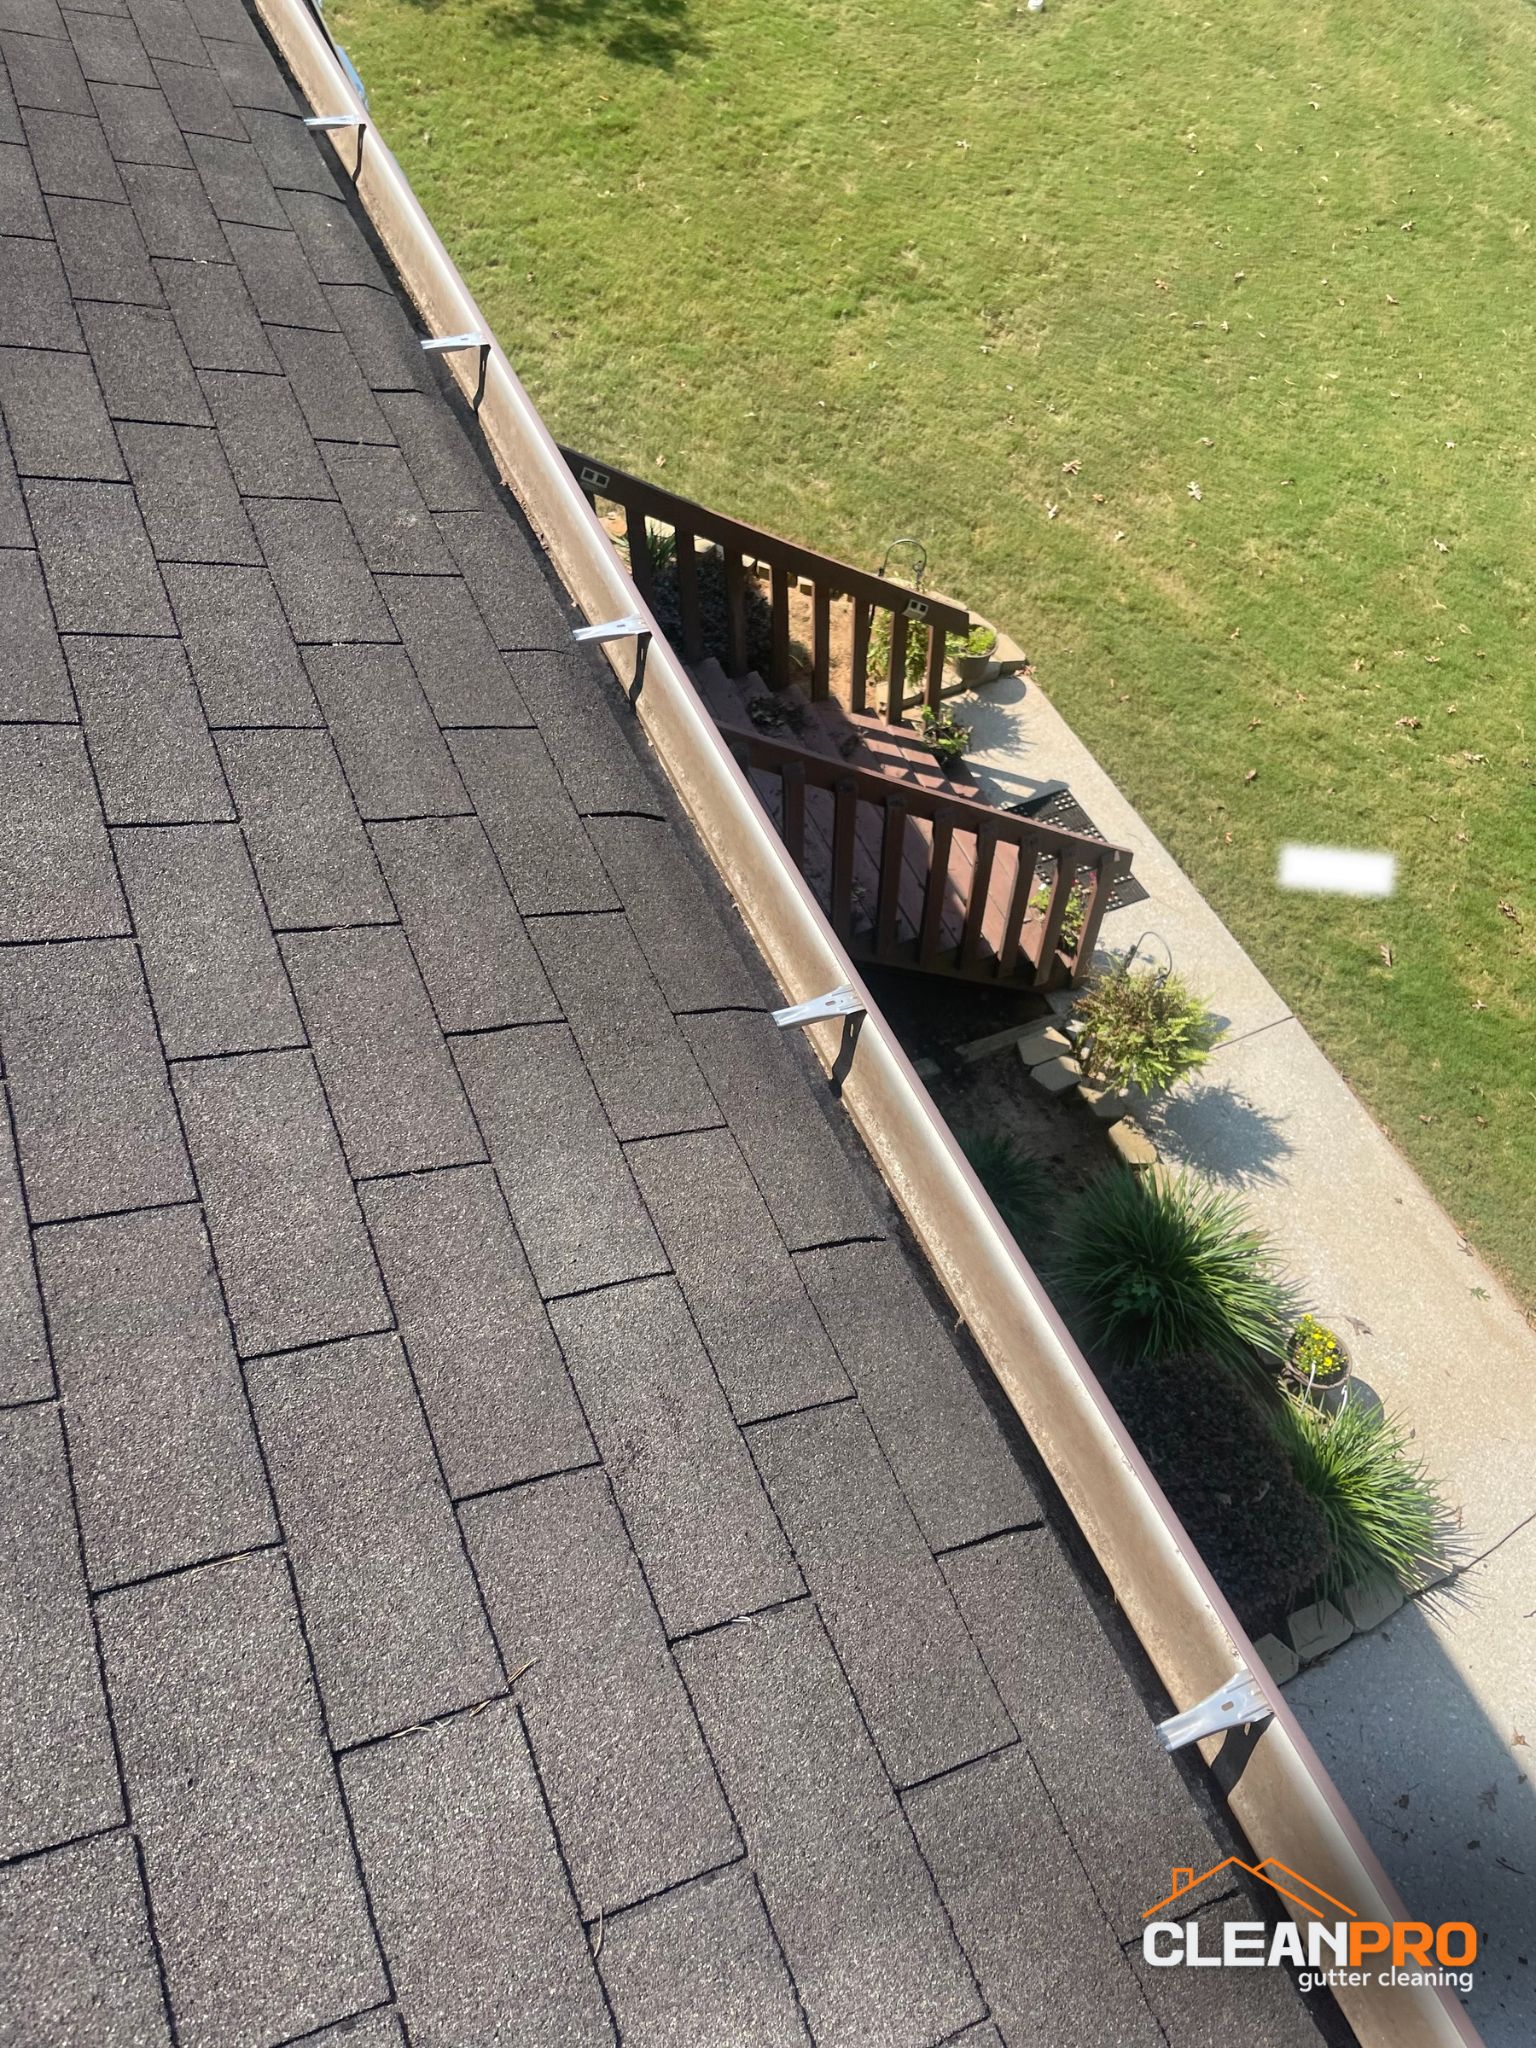 Local Gutter Cleaning in Dallas